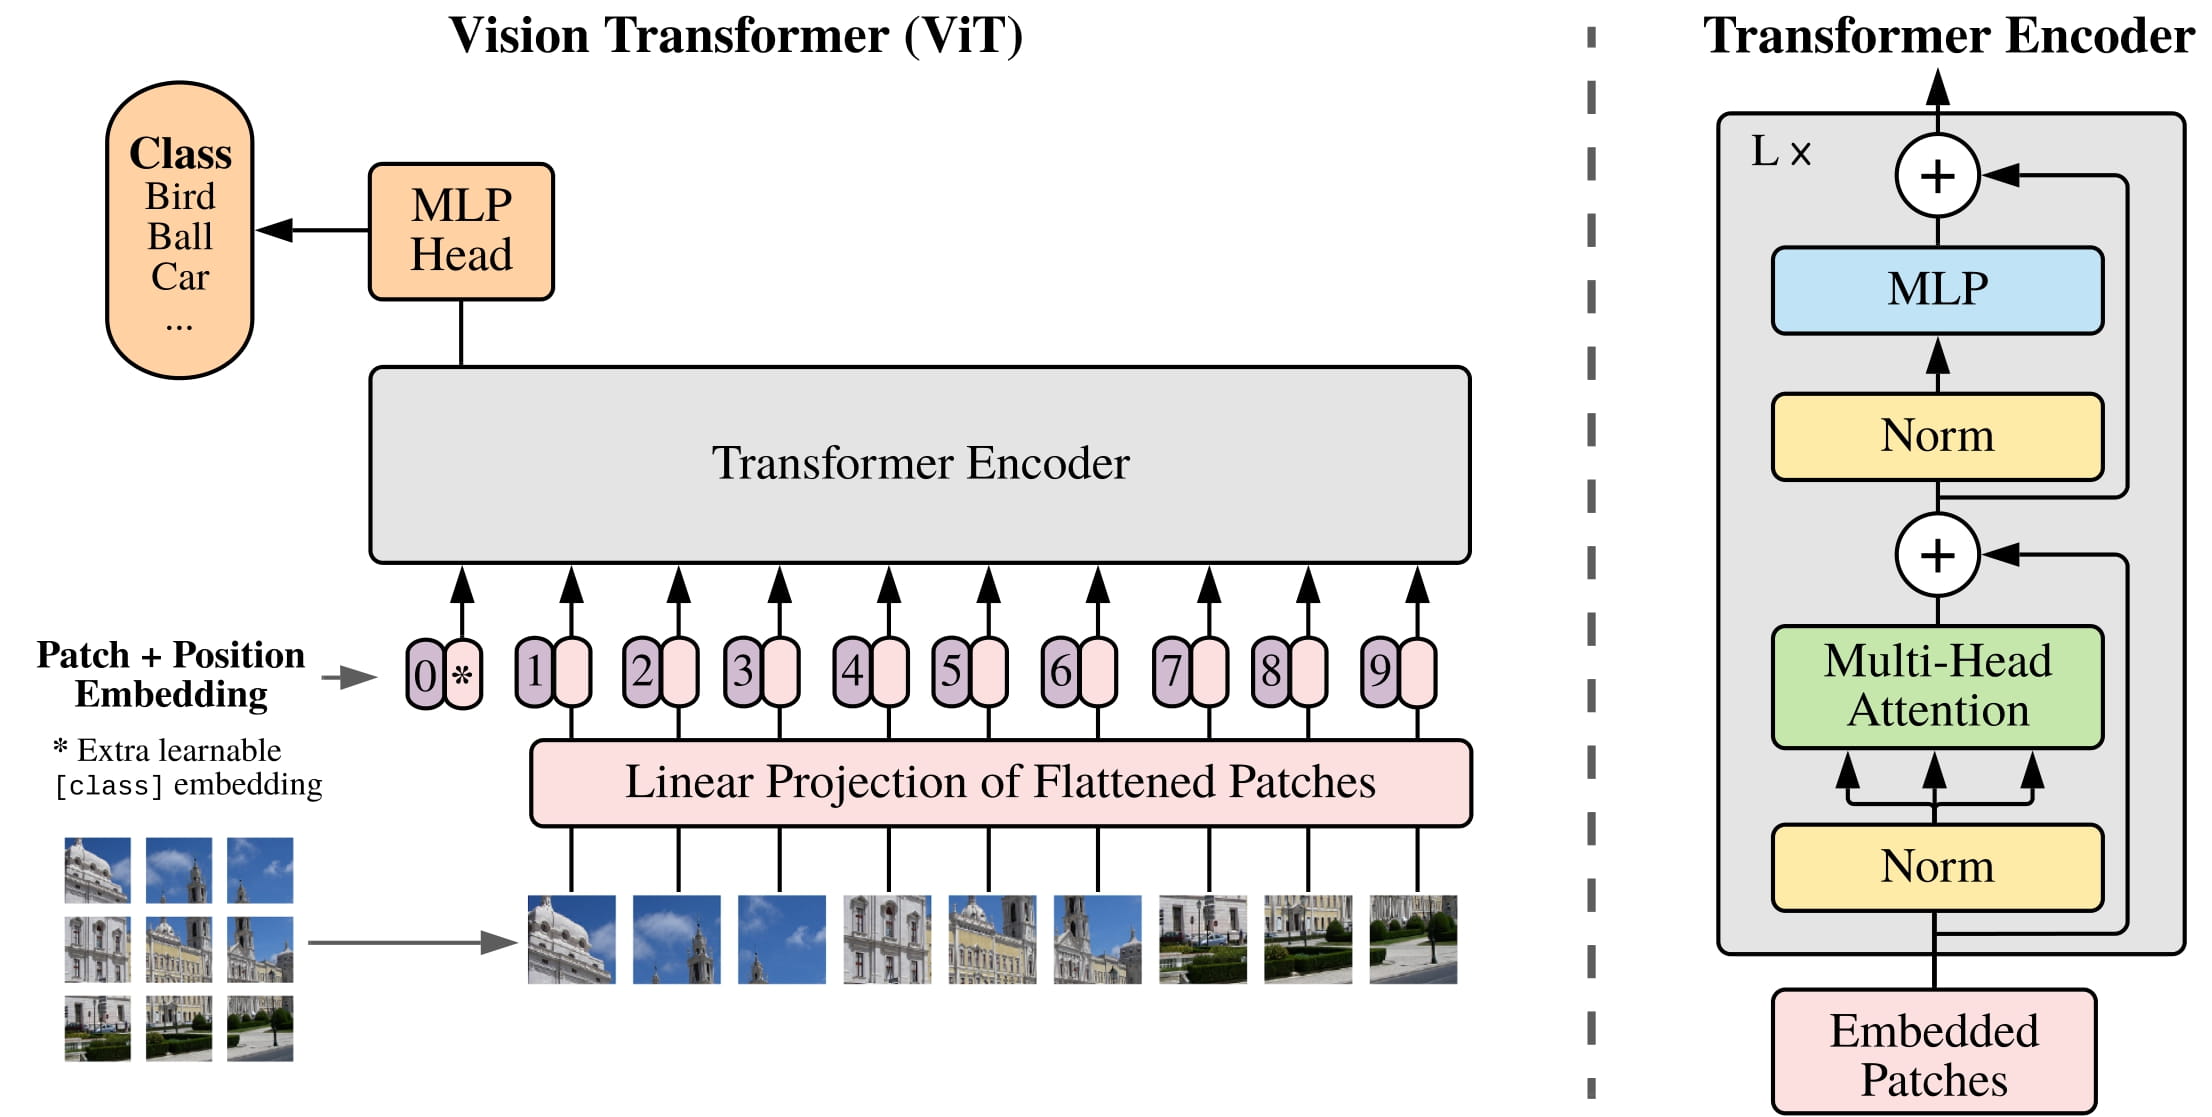 Vision Transformer overview